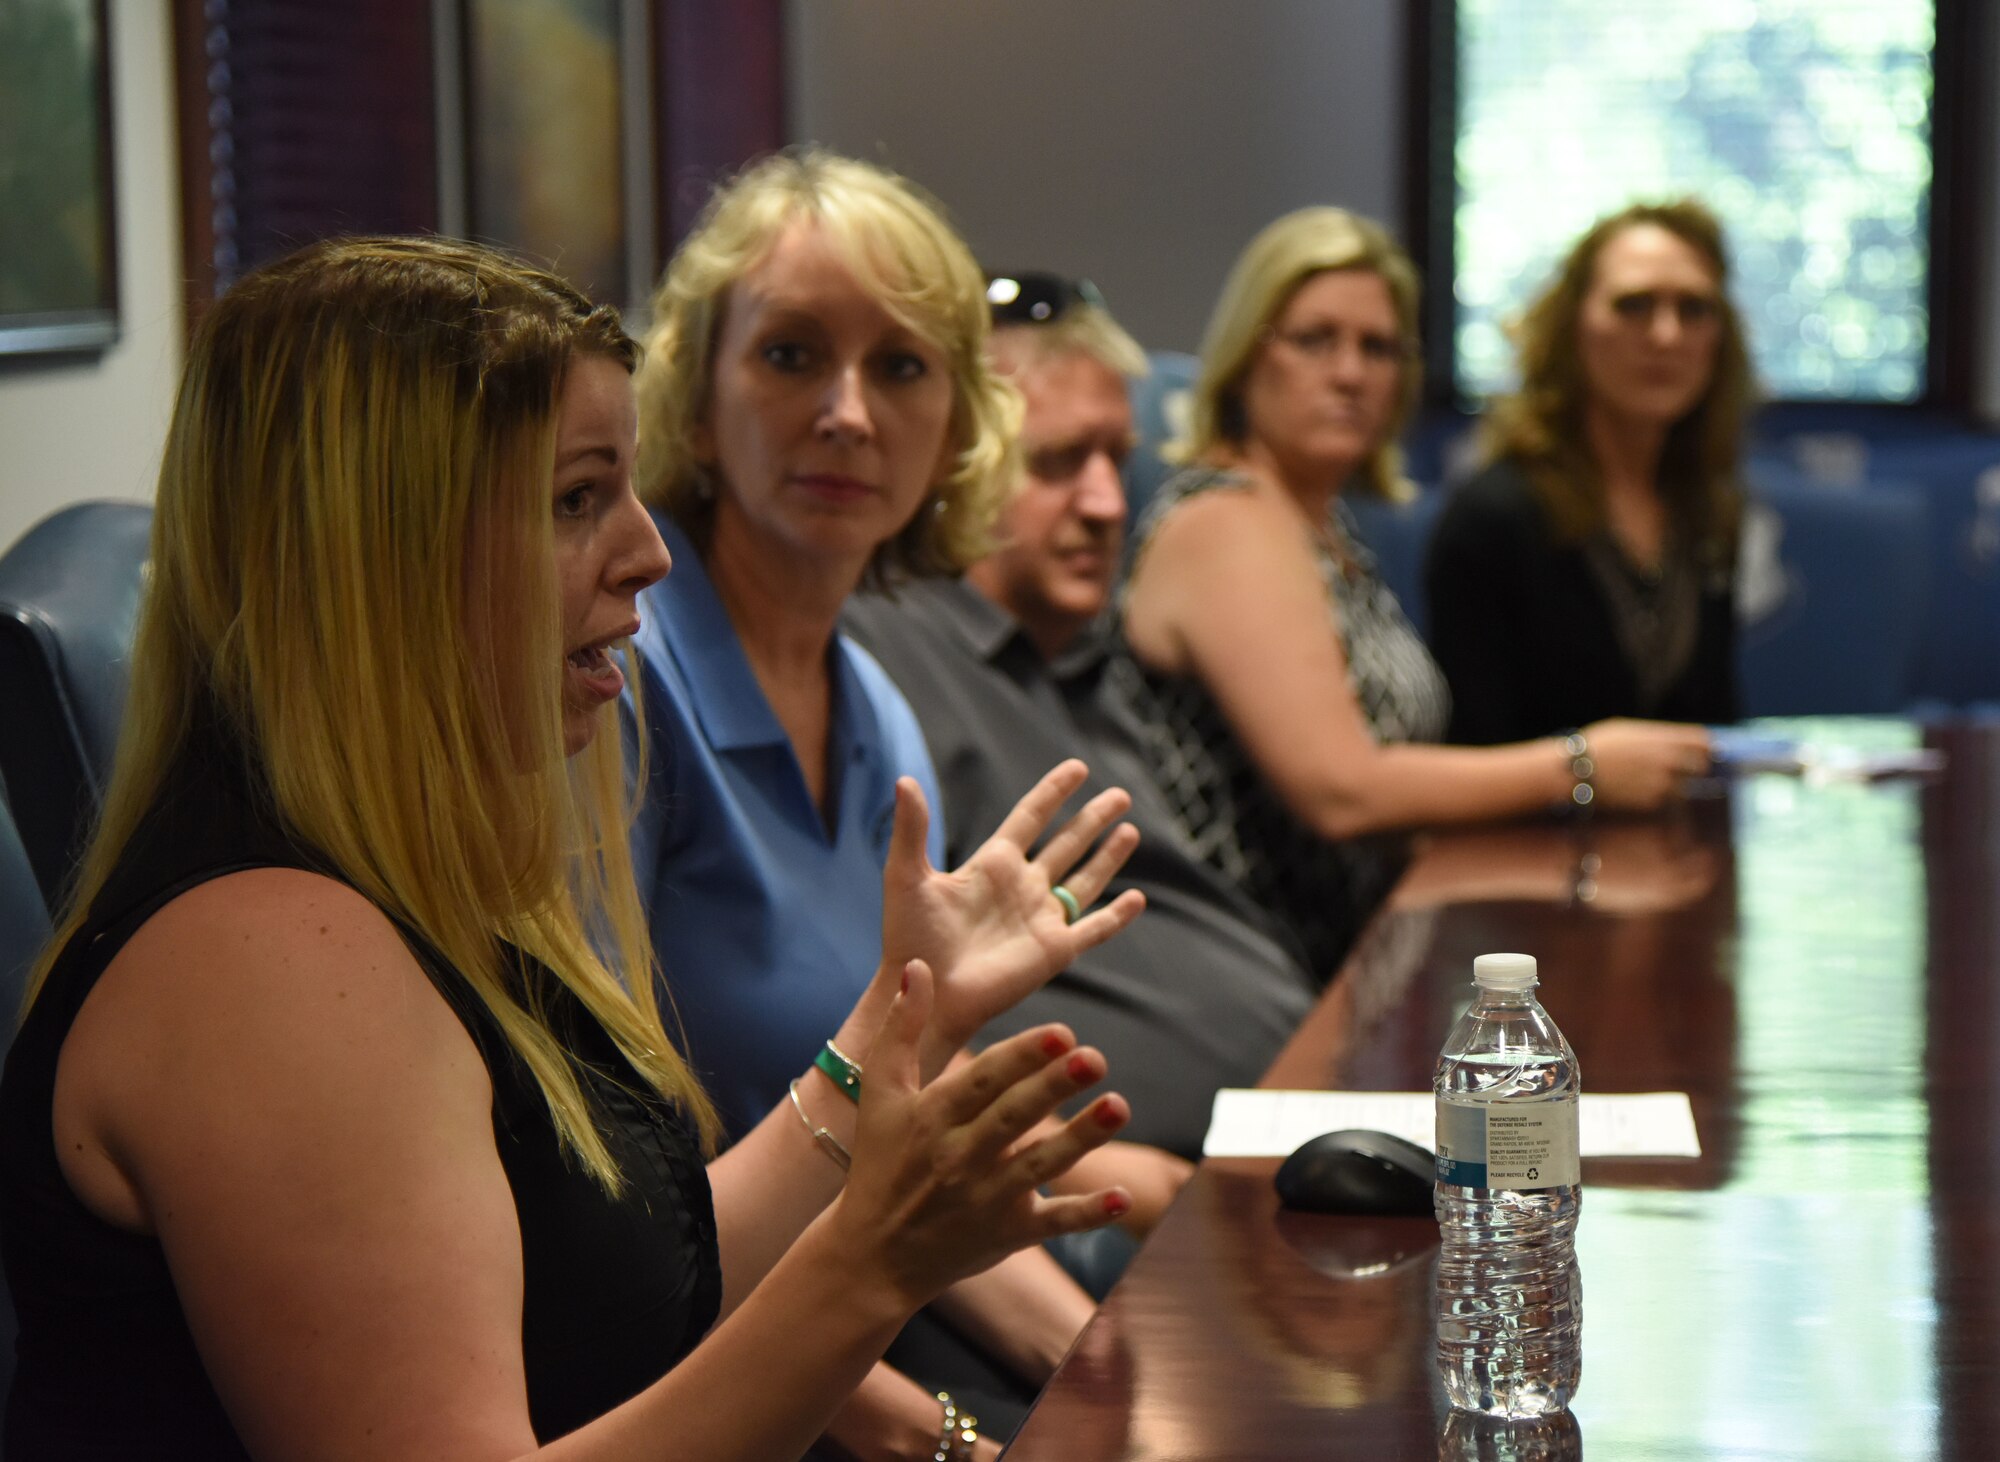 Erin Beihl, spouse of U.S. Air Force Senior Airman Travis Beihl, 81st Training Wing photojournalist, speaks during a meet and greet session with Keesler’s Key Spouses at the 81st Training Wing headquarters building at Keesler Air Force Base, Mississippi, May 18, 2018. The meeting was held to discuss the key spouse program benefits and how to increase involvement. (U.S. Air Force photo by Kemberly Groue)